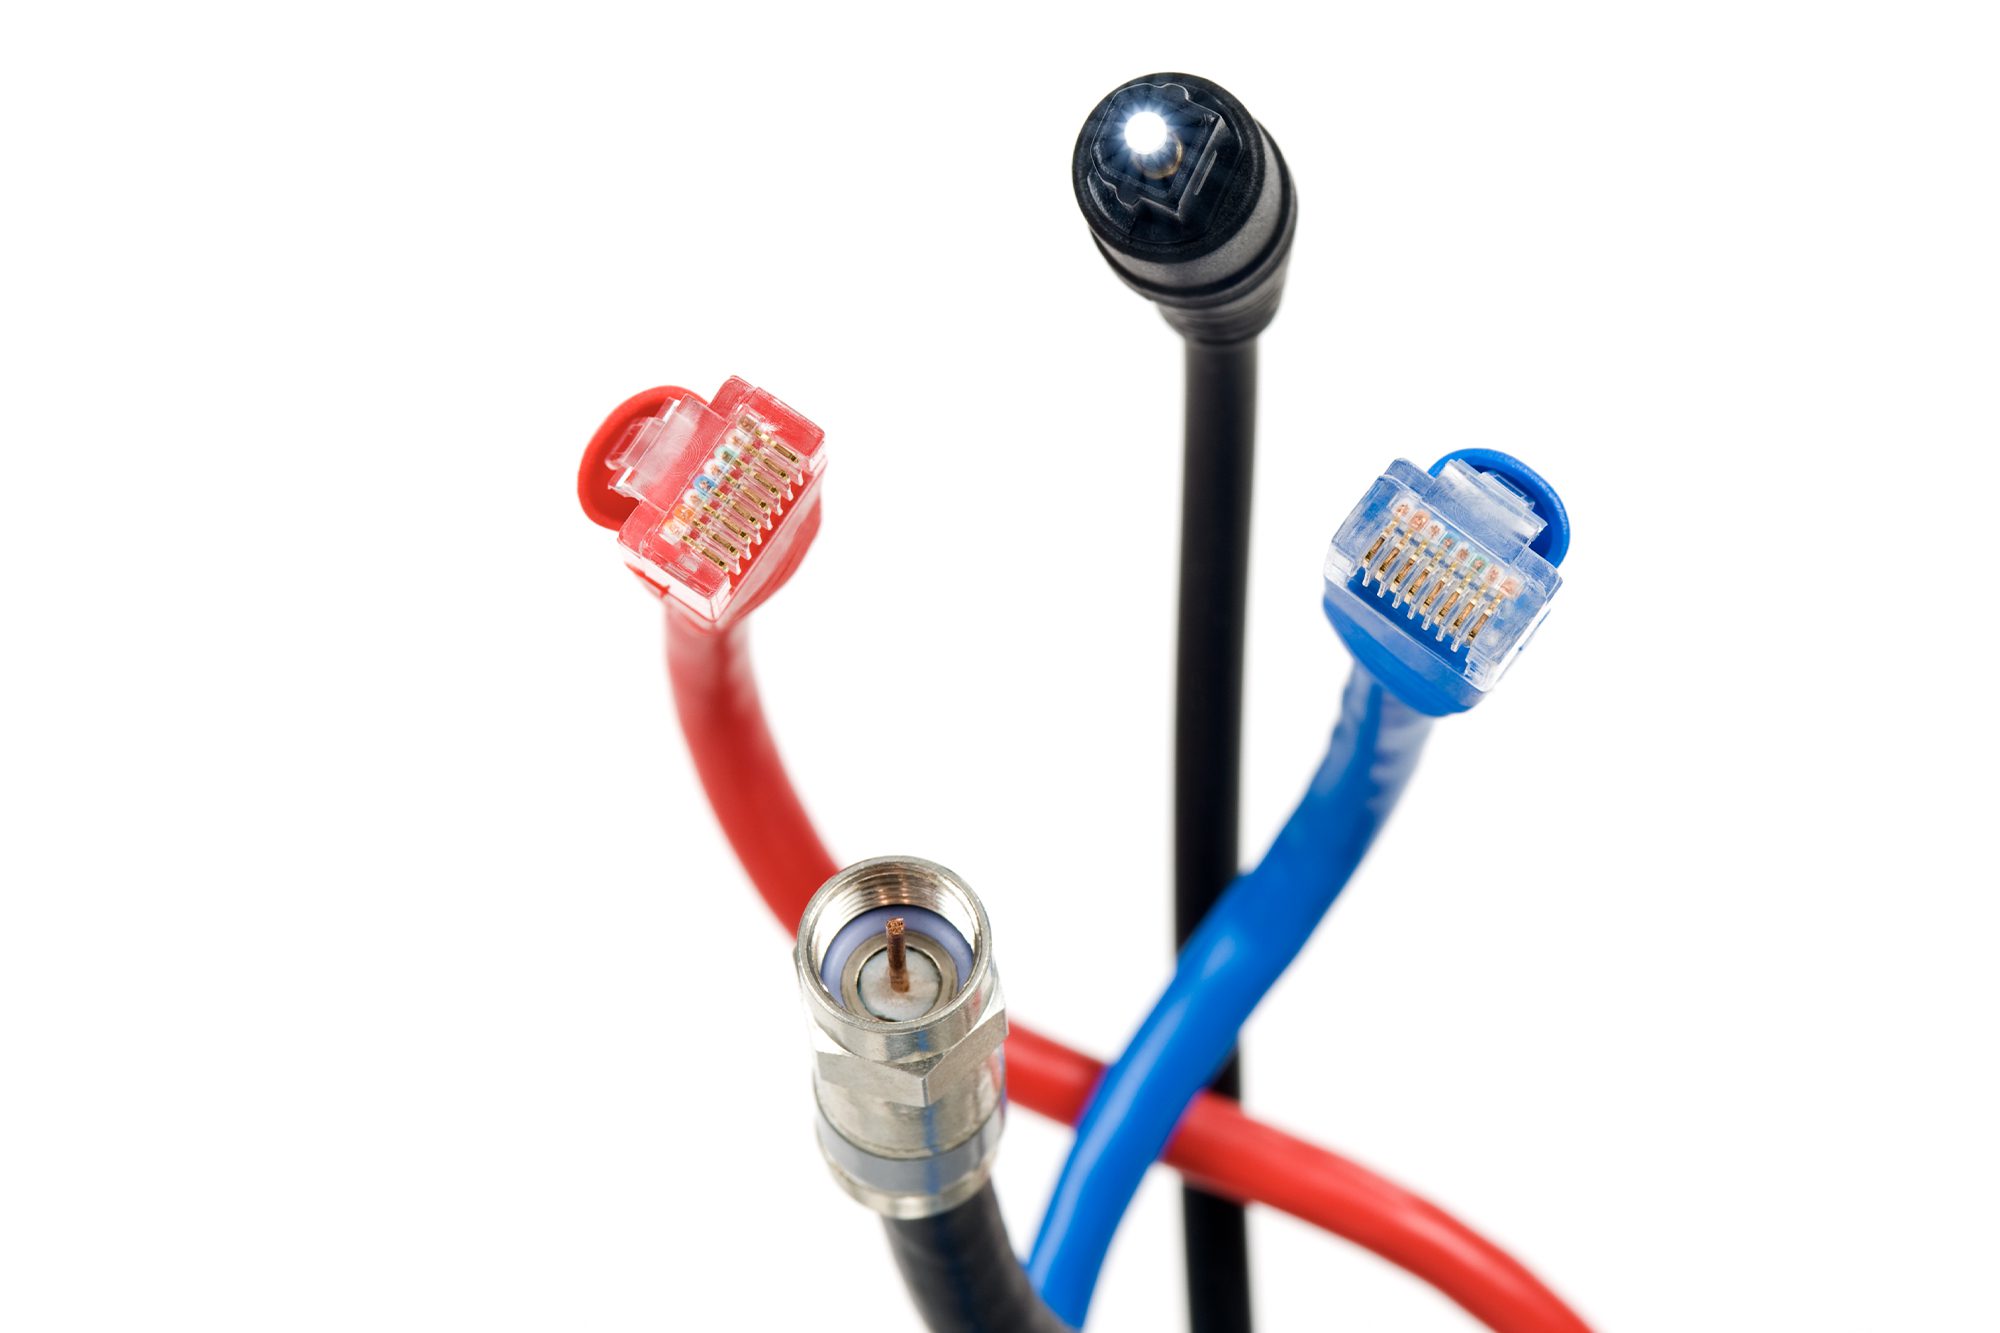 Coaxial Cable Internet Benefits for Businesses